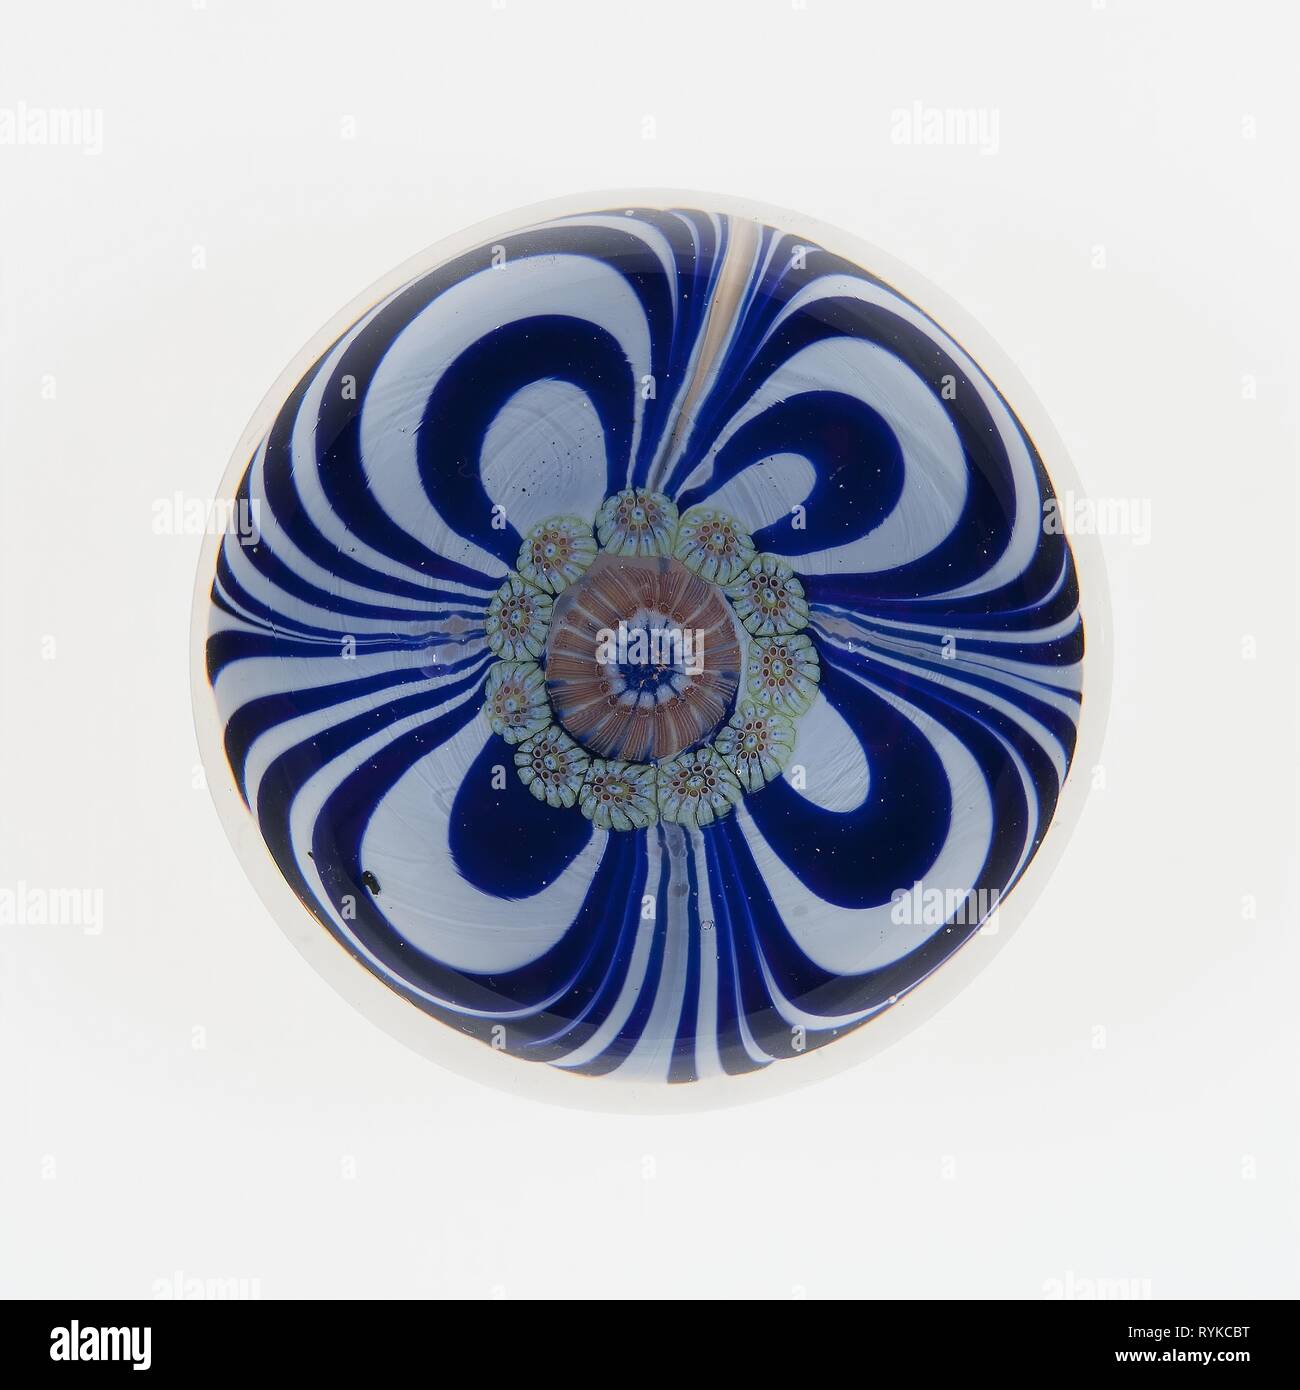 Paperweight. Saint-Louis; France, founded 1767. Date: 1848. Dimensions: Diam. 8 cm (3 1/8 in.). Glass. Origin: France. Museum: The Chicago Art Institute, Chicago, USA. Author: Compagnie de Saint Louis. Stock Photo